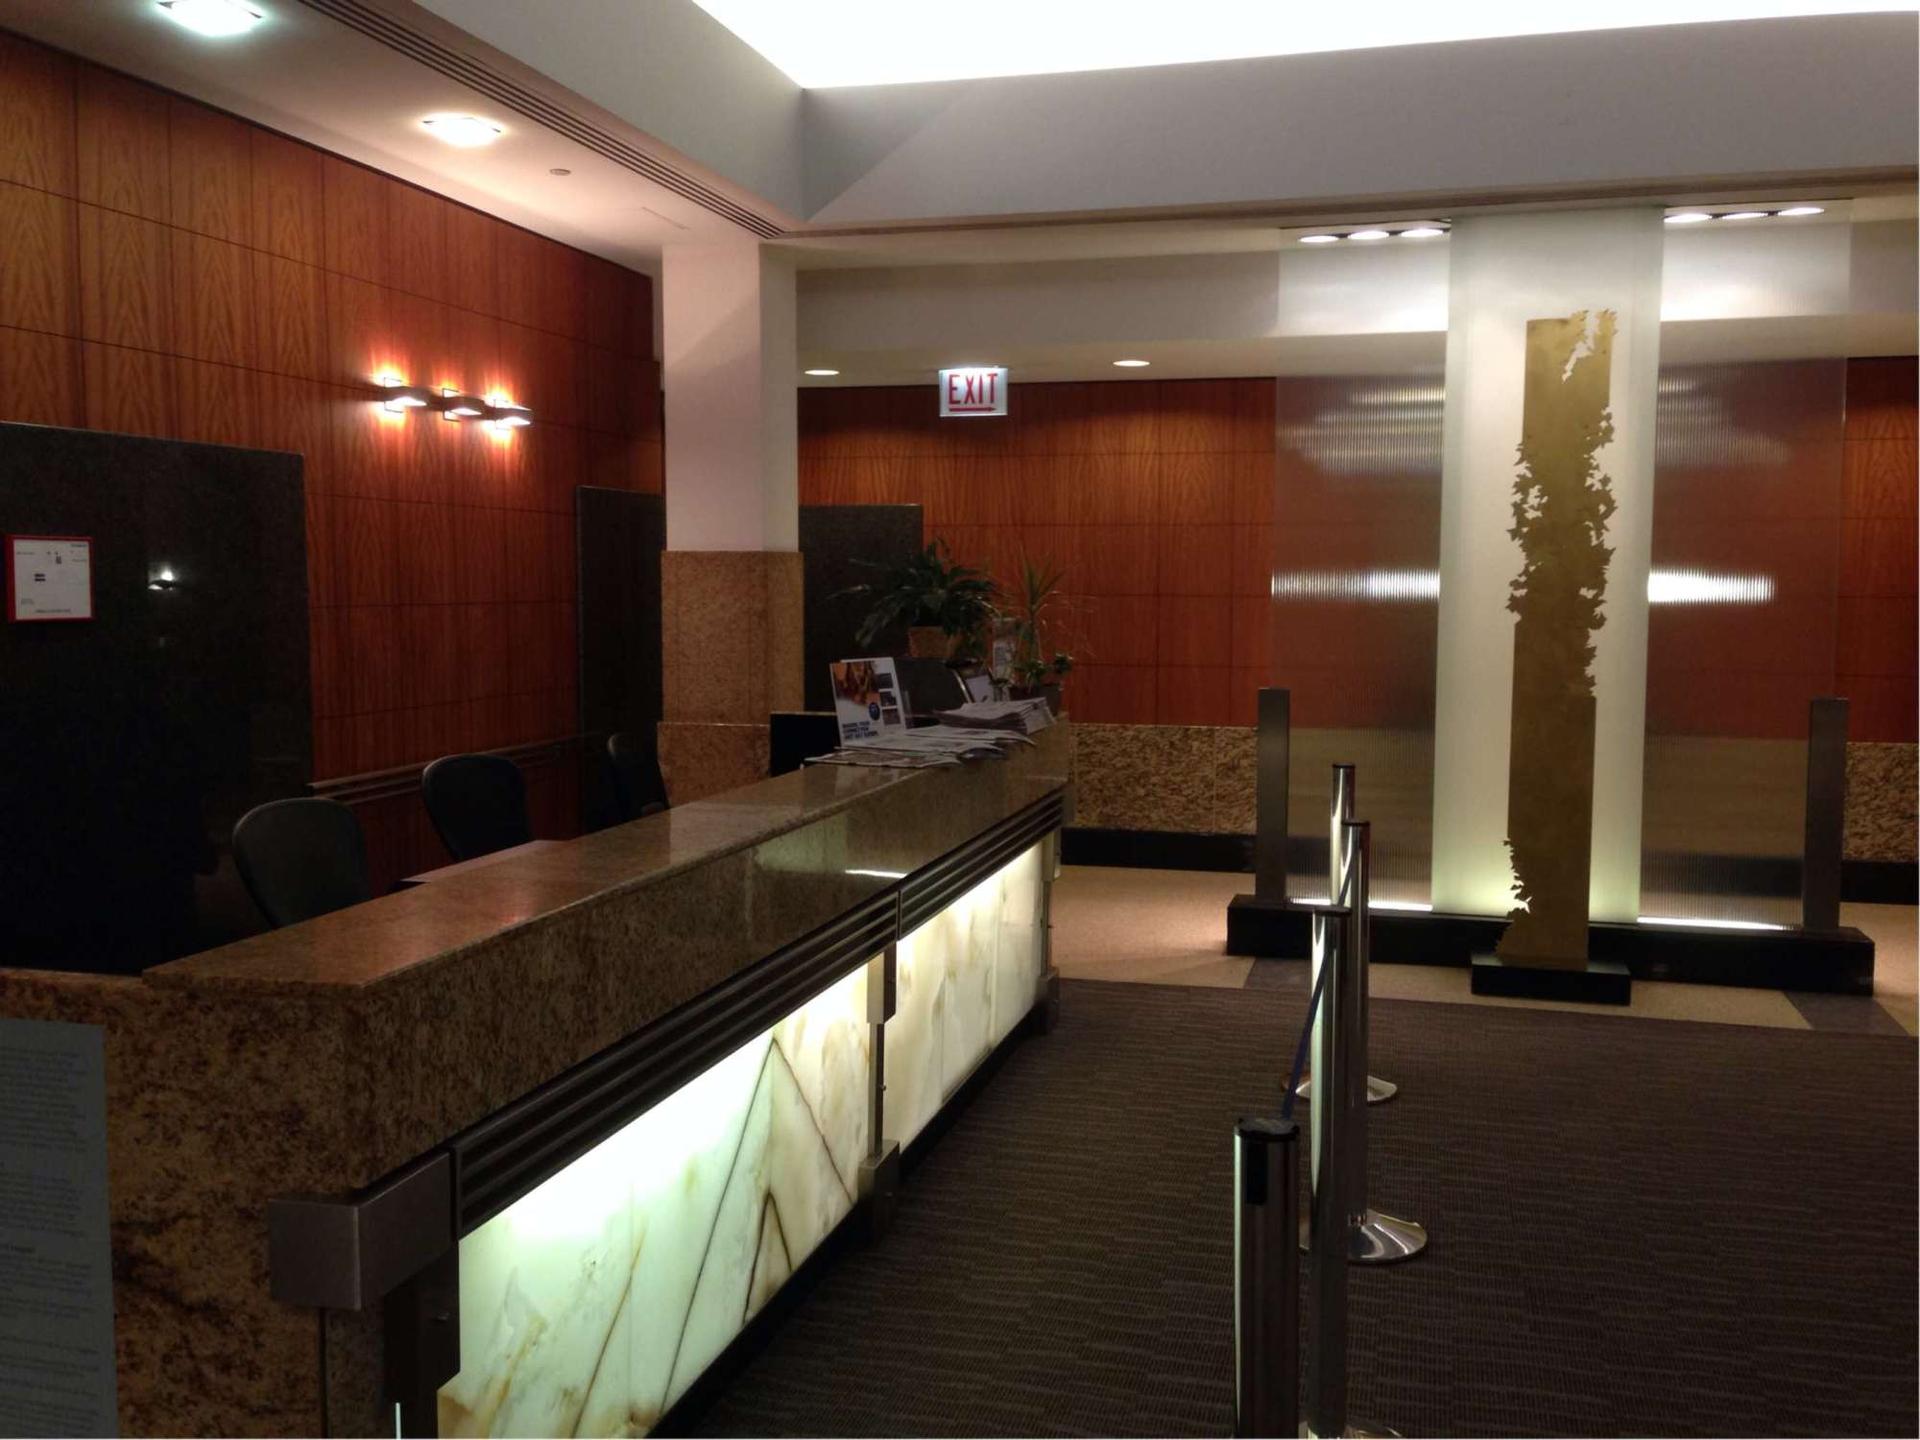 American Airlines Admirals Club image 7 of 50